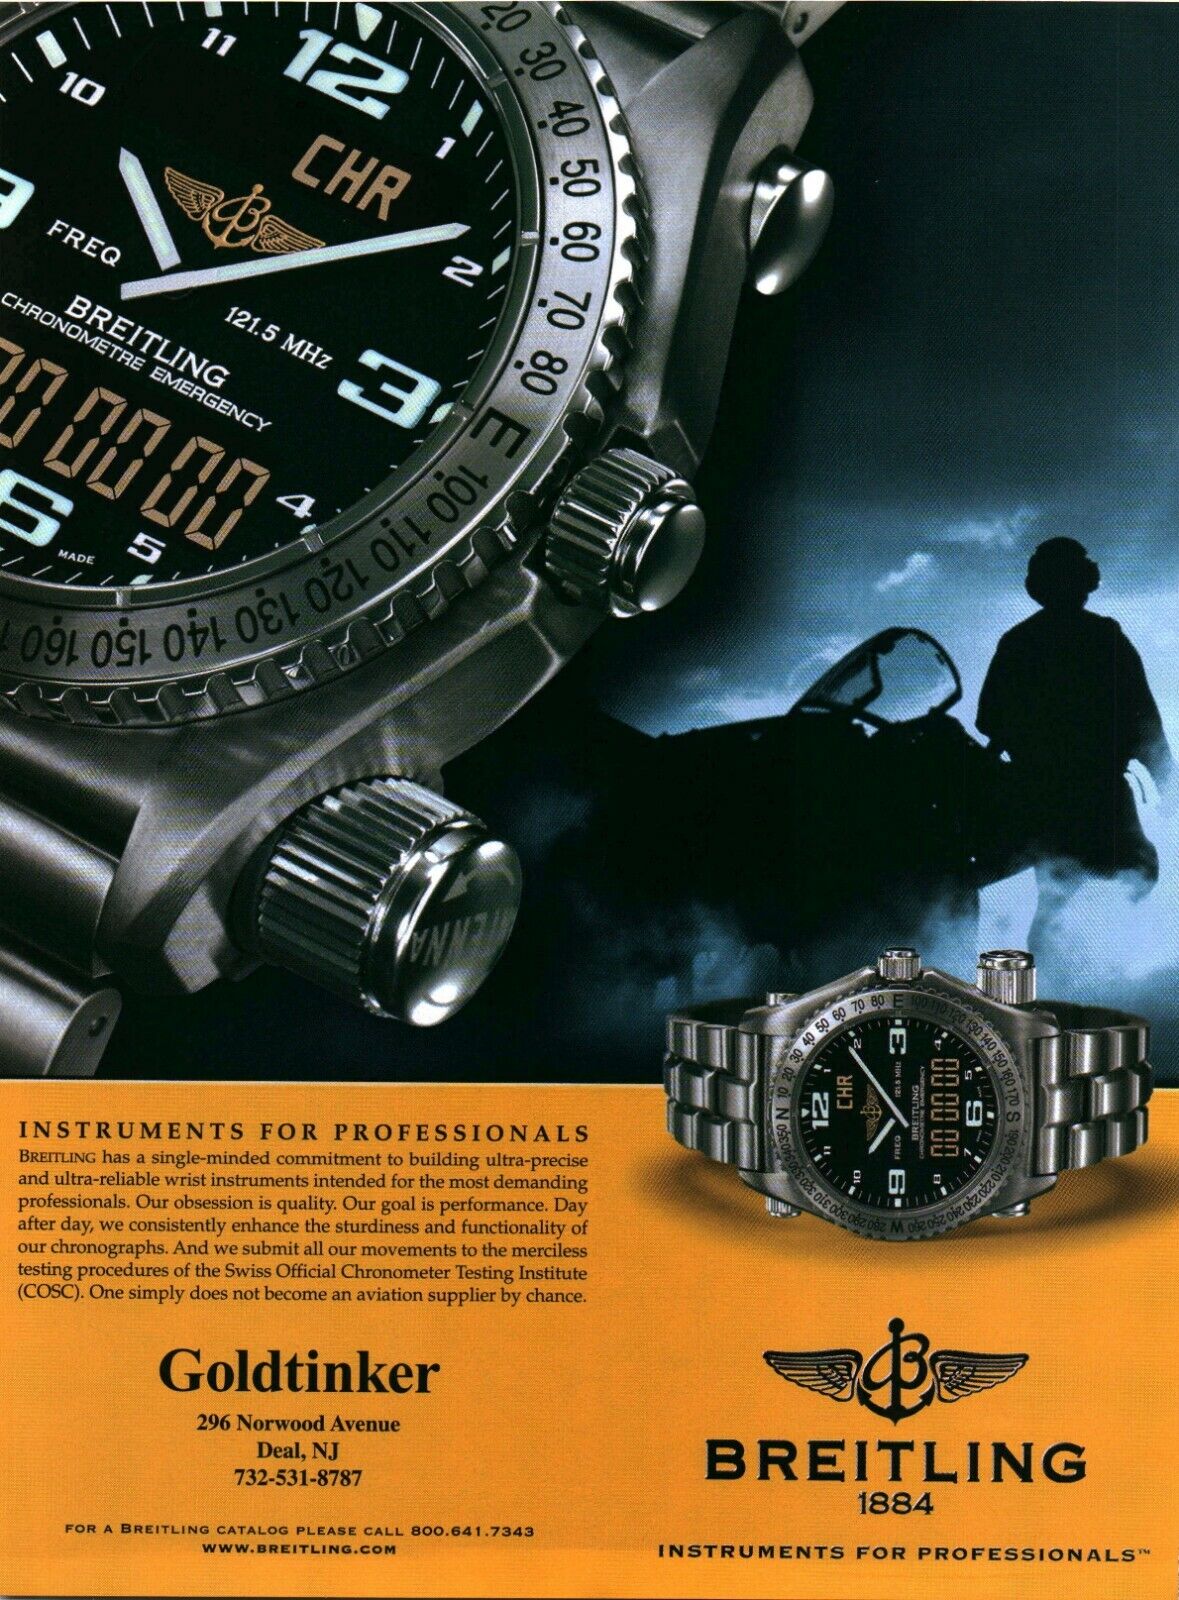 2002 VINTAGE PRINT AD - BREITLING WATCH AD...GOLDTINKER...DEAL, NEW JERSEY NJ